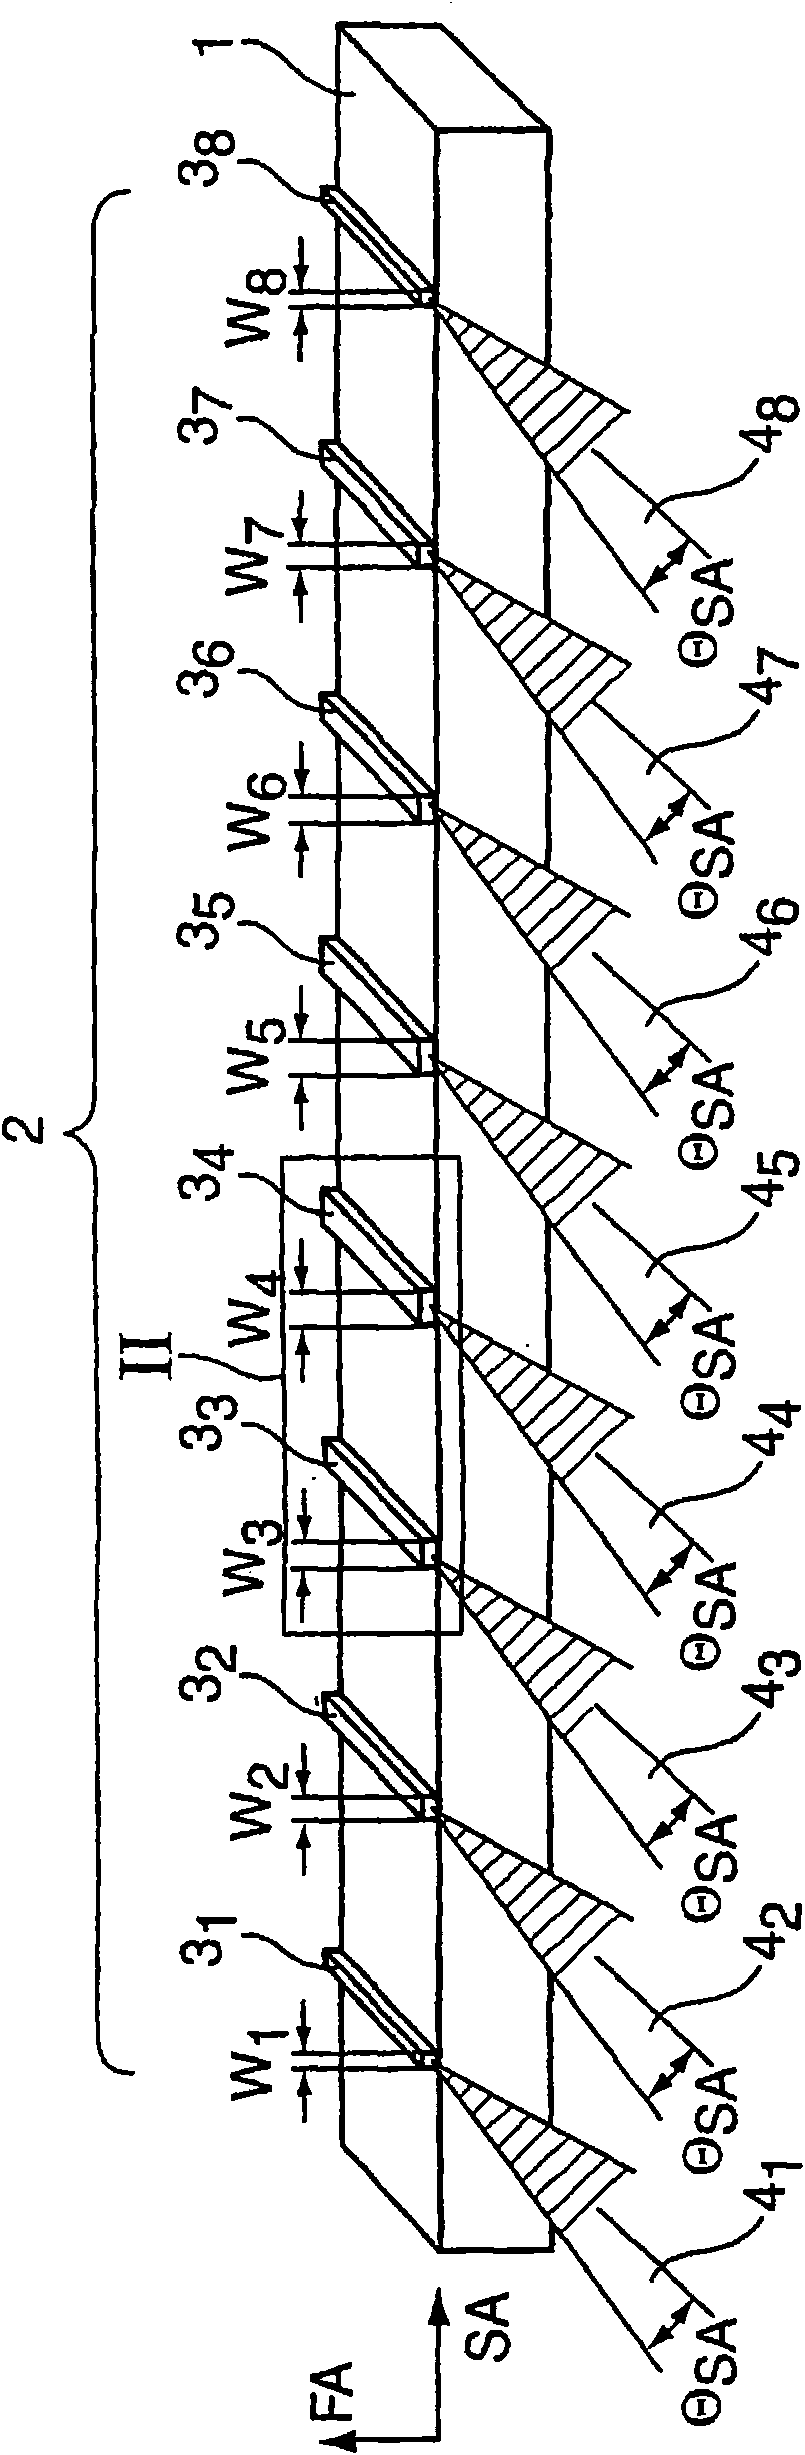 Diode laser structure to generate diode laser radiation with optimized fiber coupling radiation parameter product